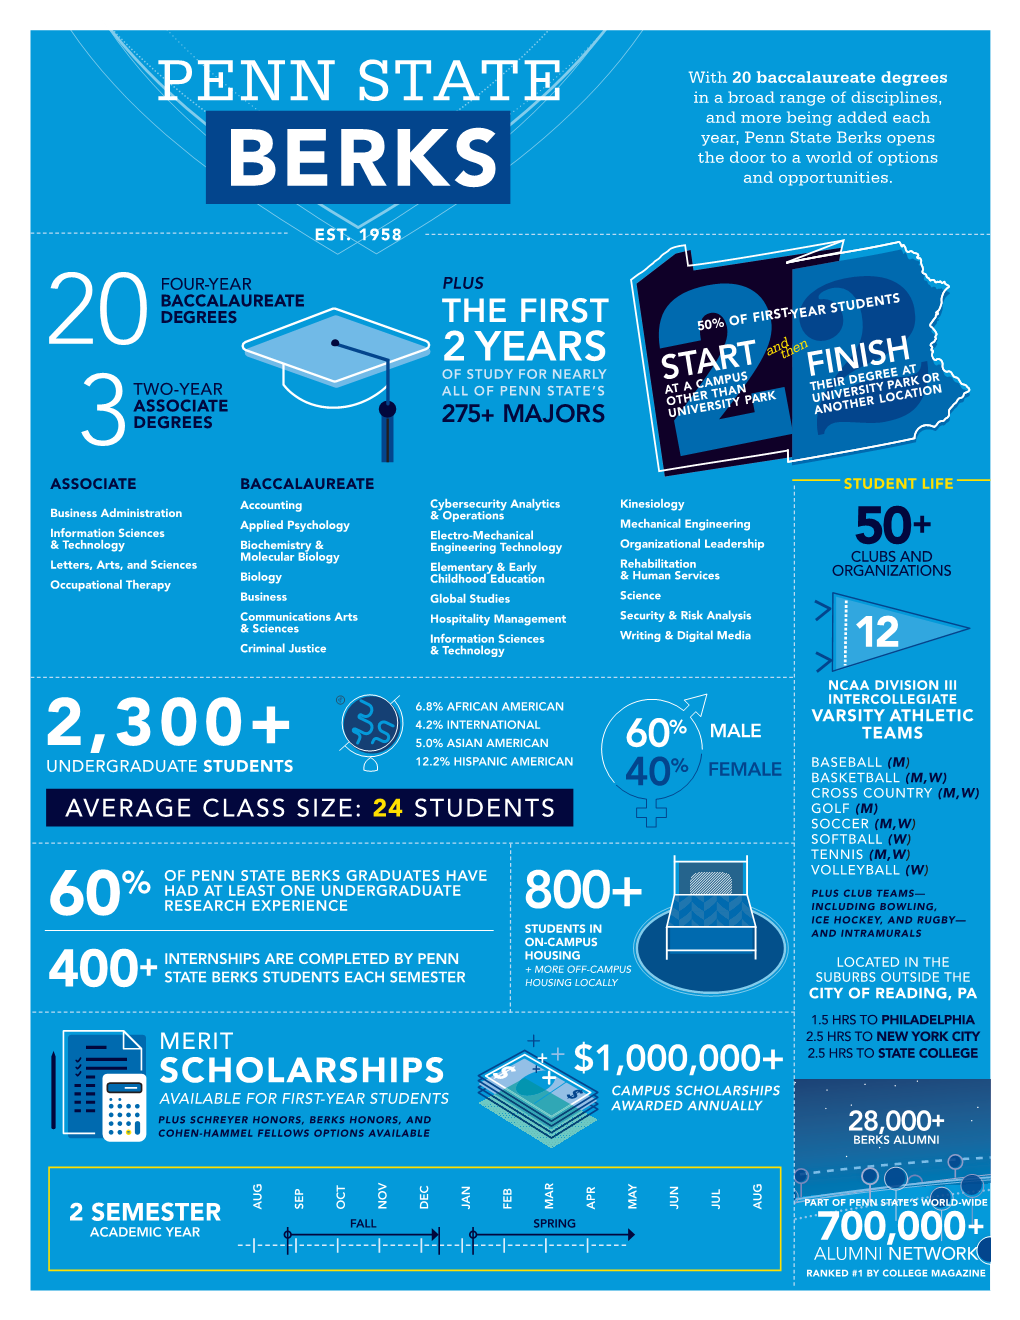 Penn State Berks Opens the Door to a World of Options BERKS and Opportunities